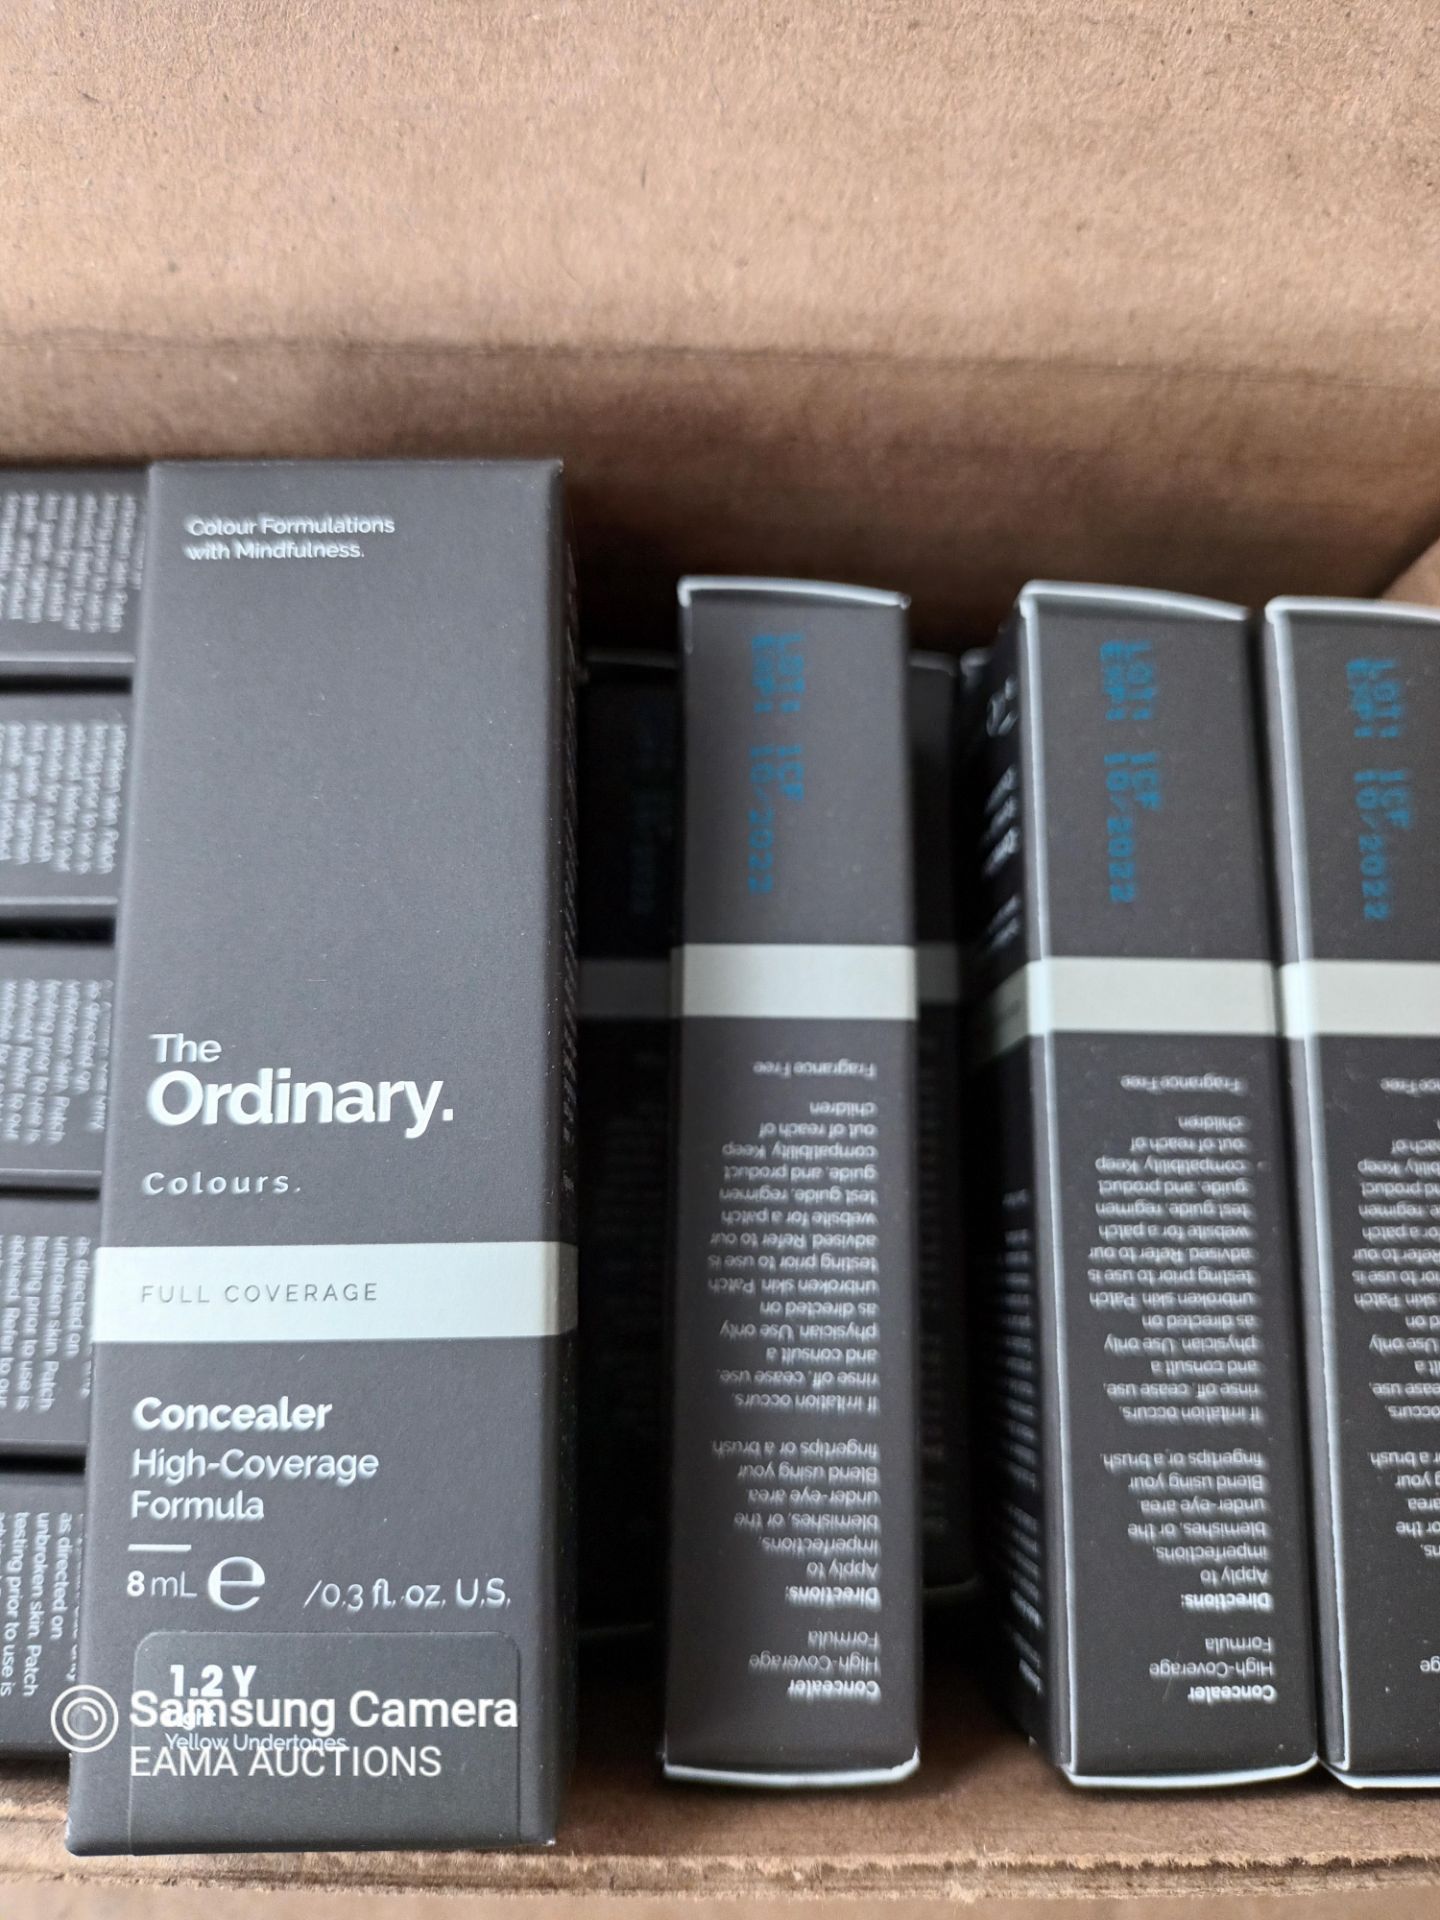 Approx 1800 x Brand New The Ordinary Full Coverage Concealer - 10 boxes of 180 concealers